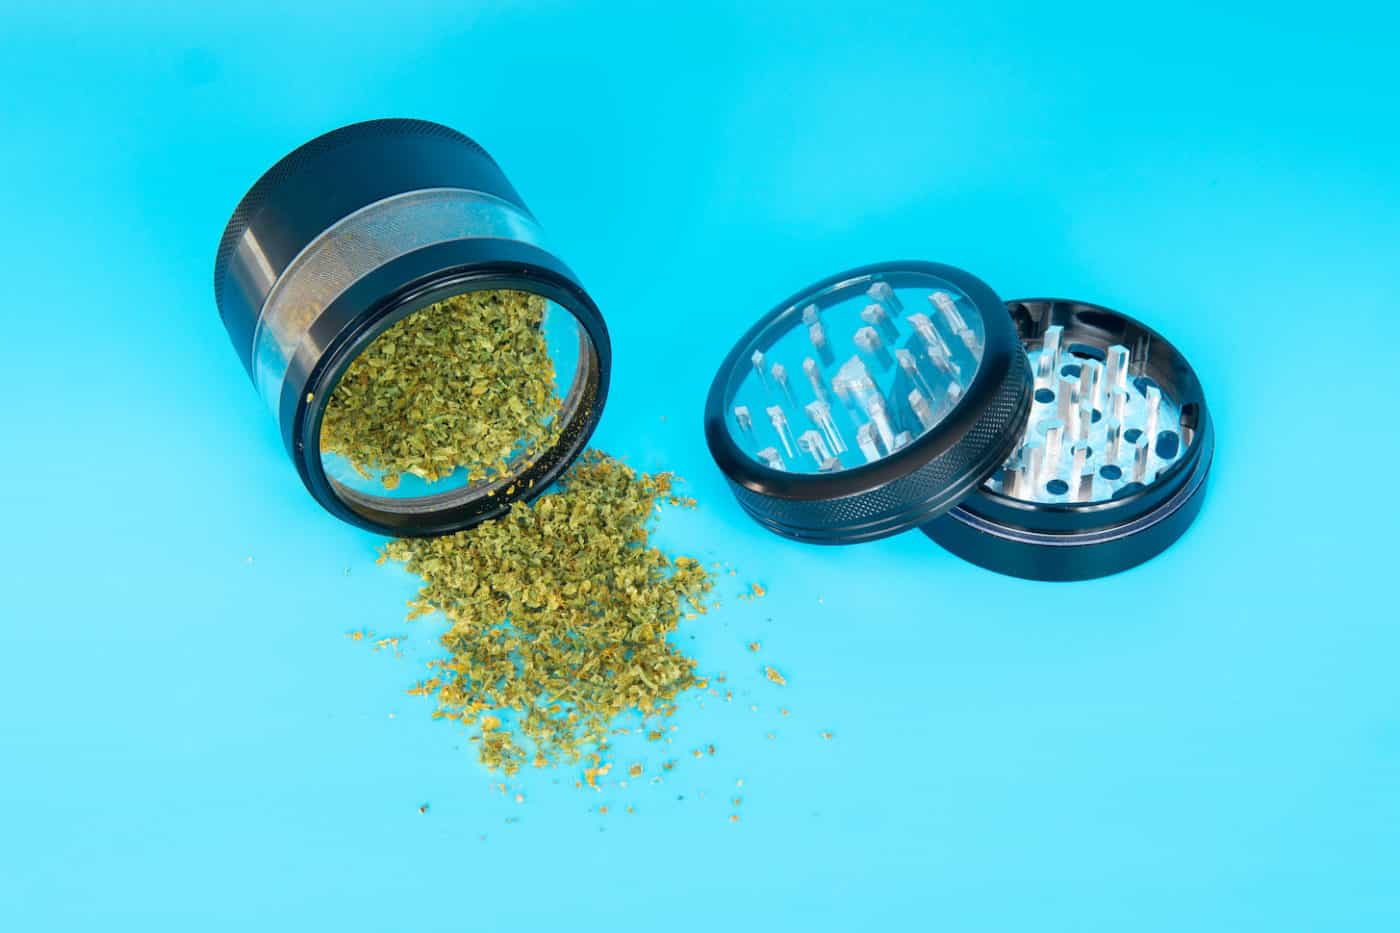 5 Tips to Breaking Up Cannabis Without a Weed Grinder